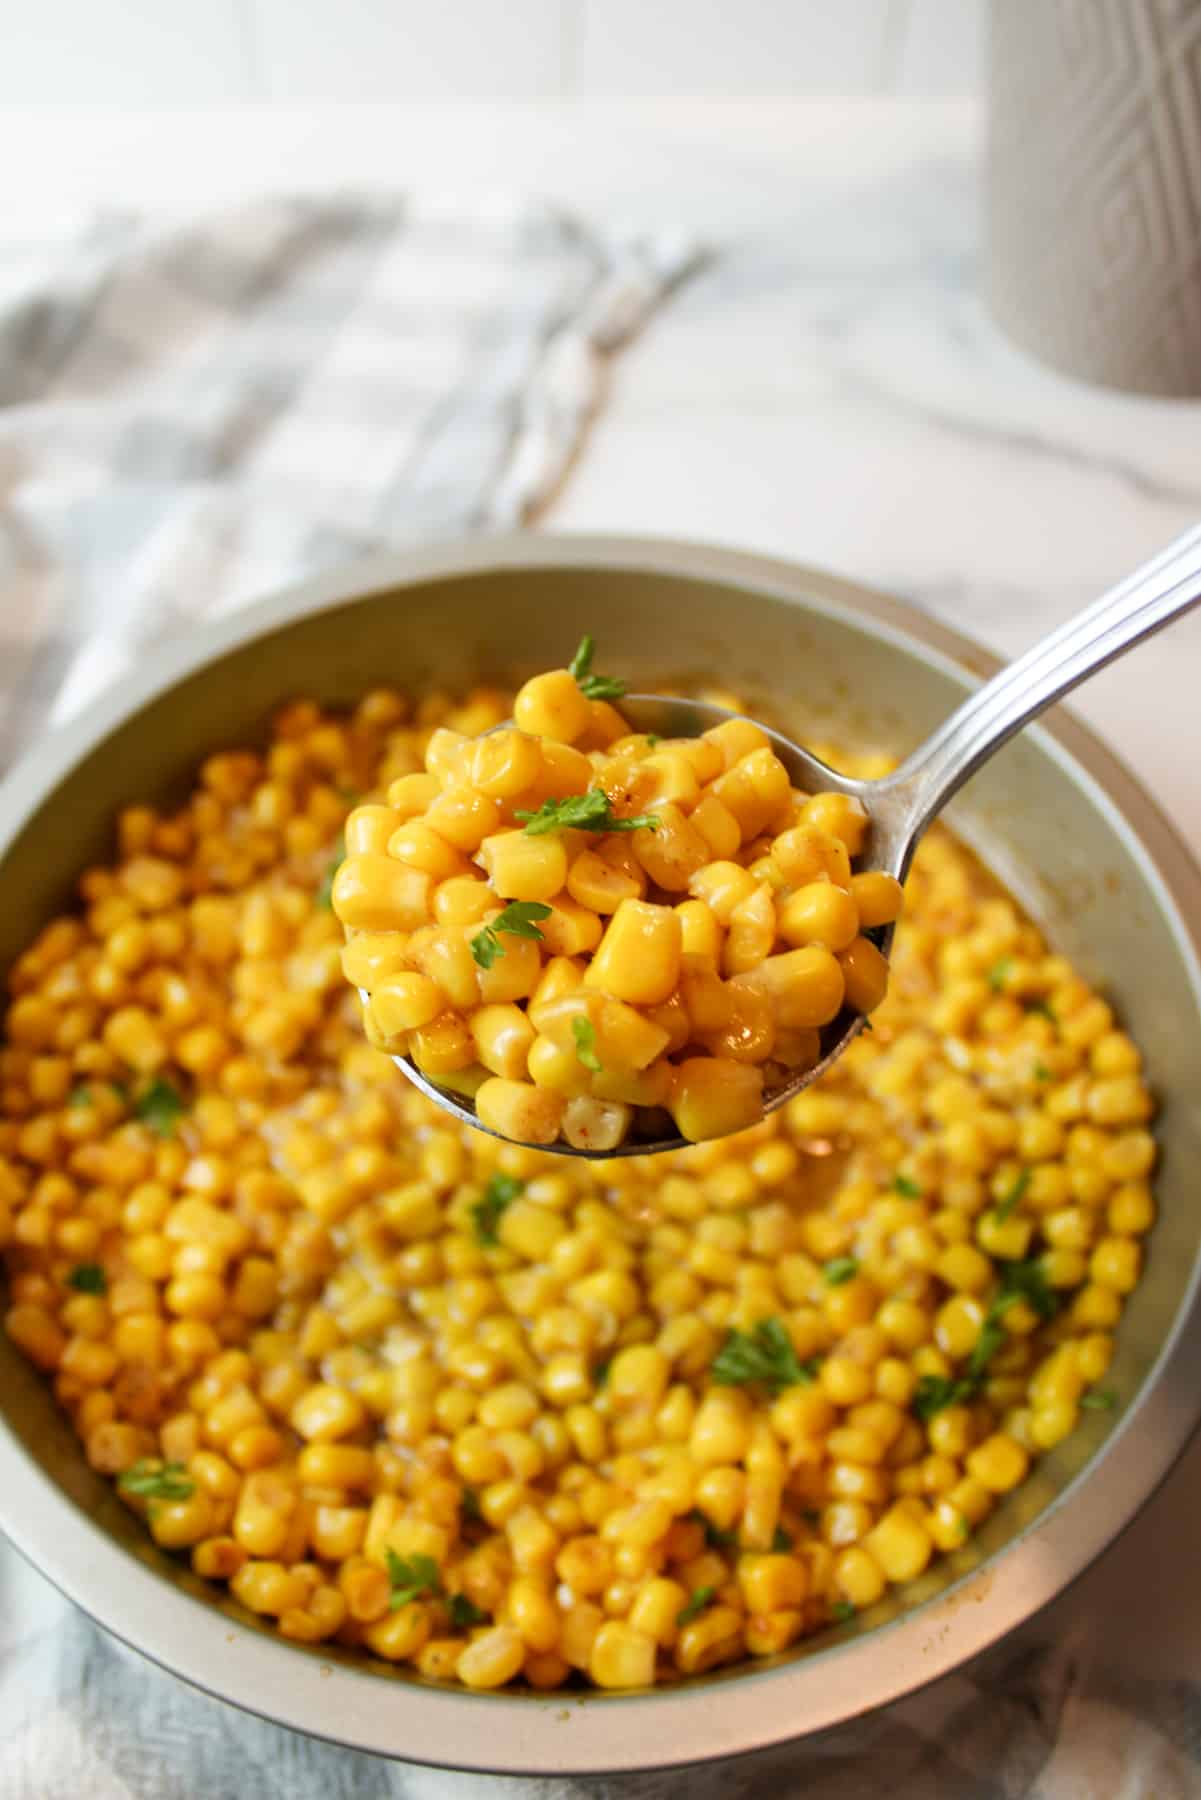 a spoon holding up a scoop of cooked corn kernels and garnished with fresh parsley